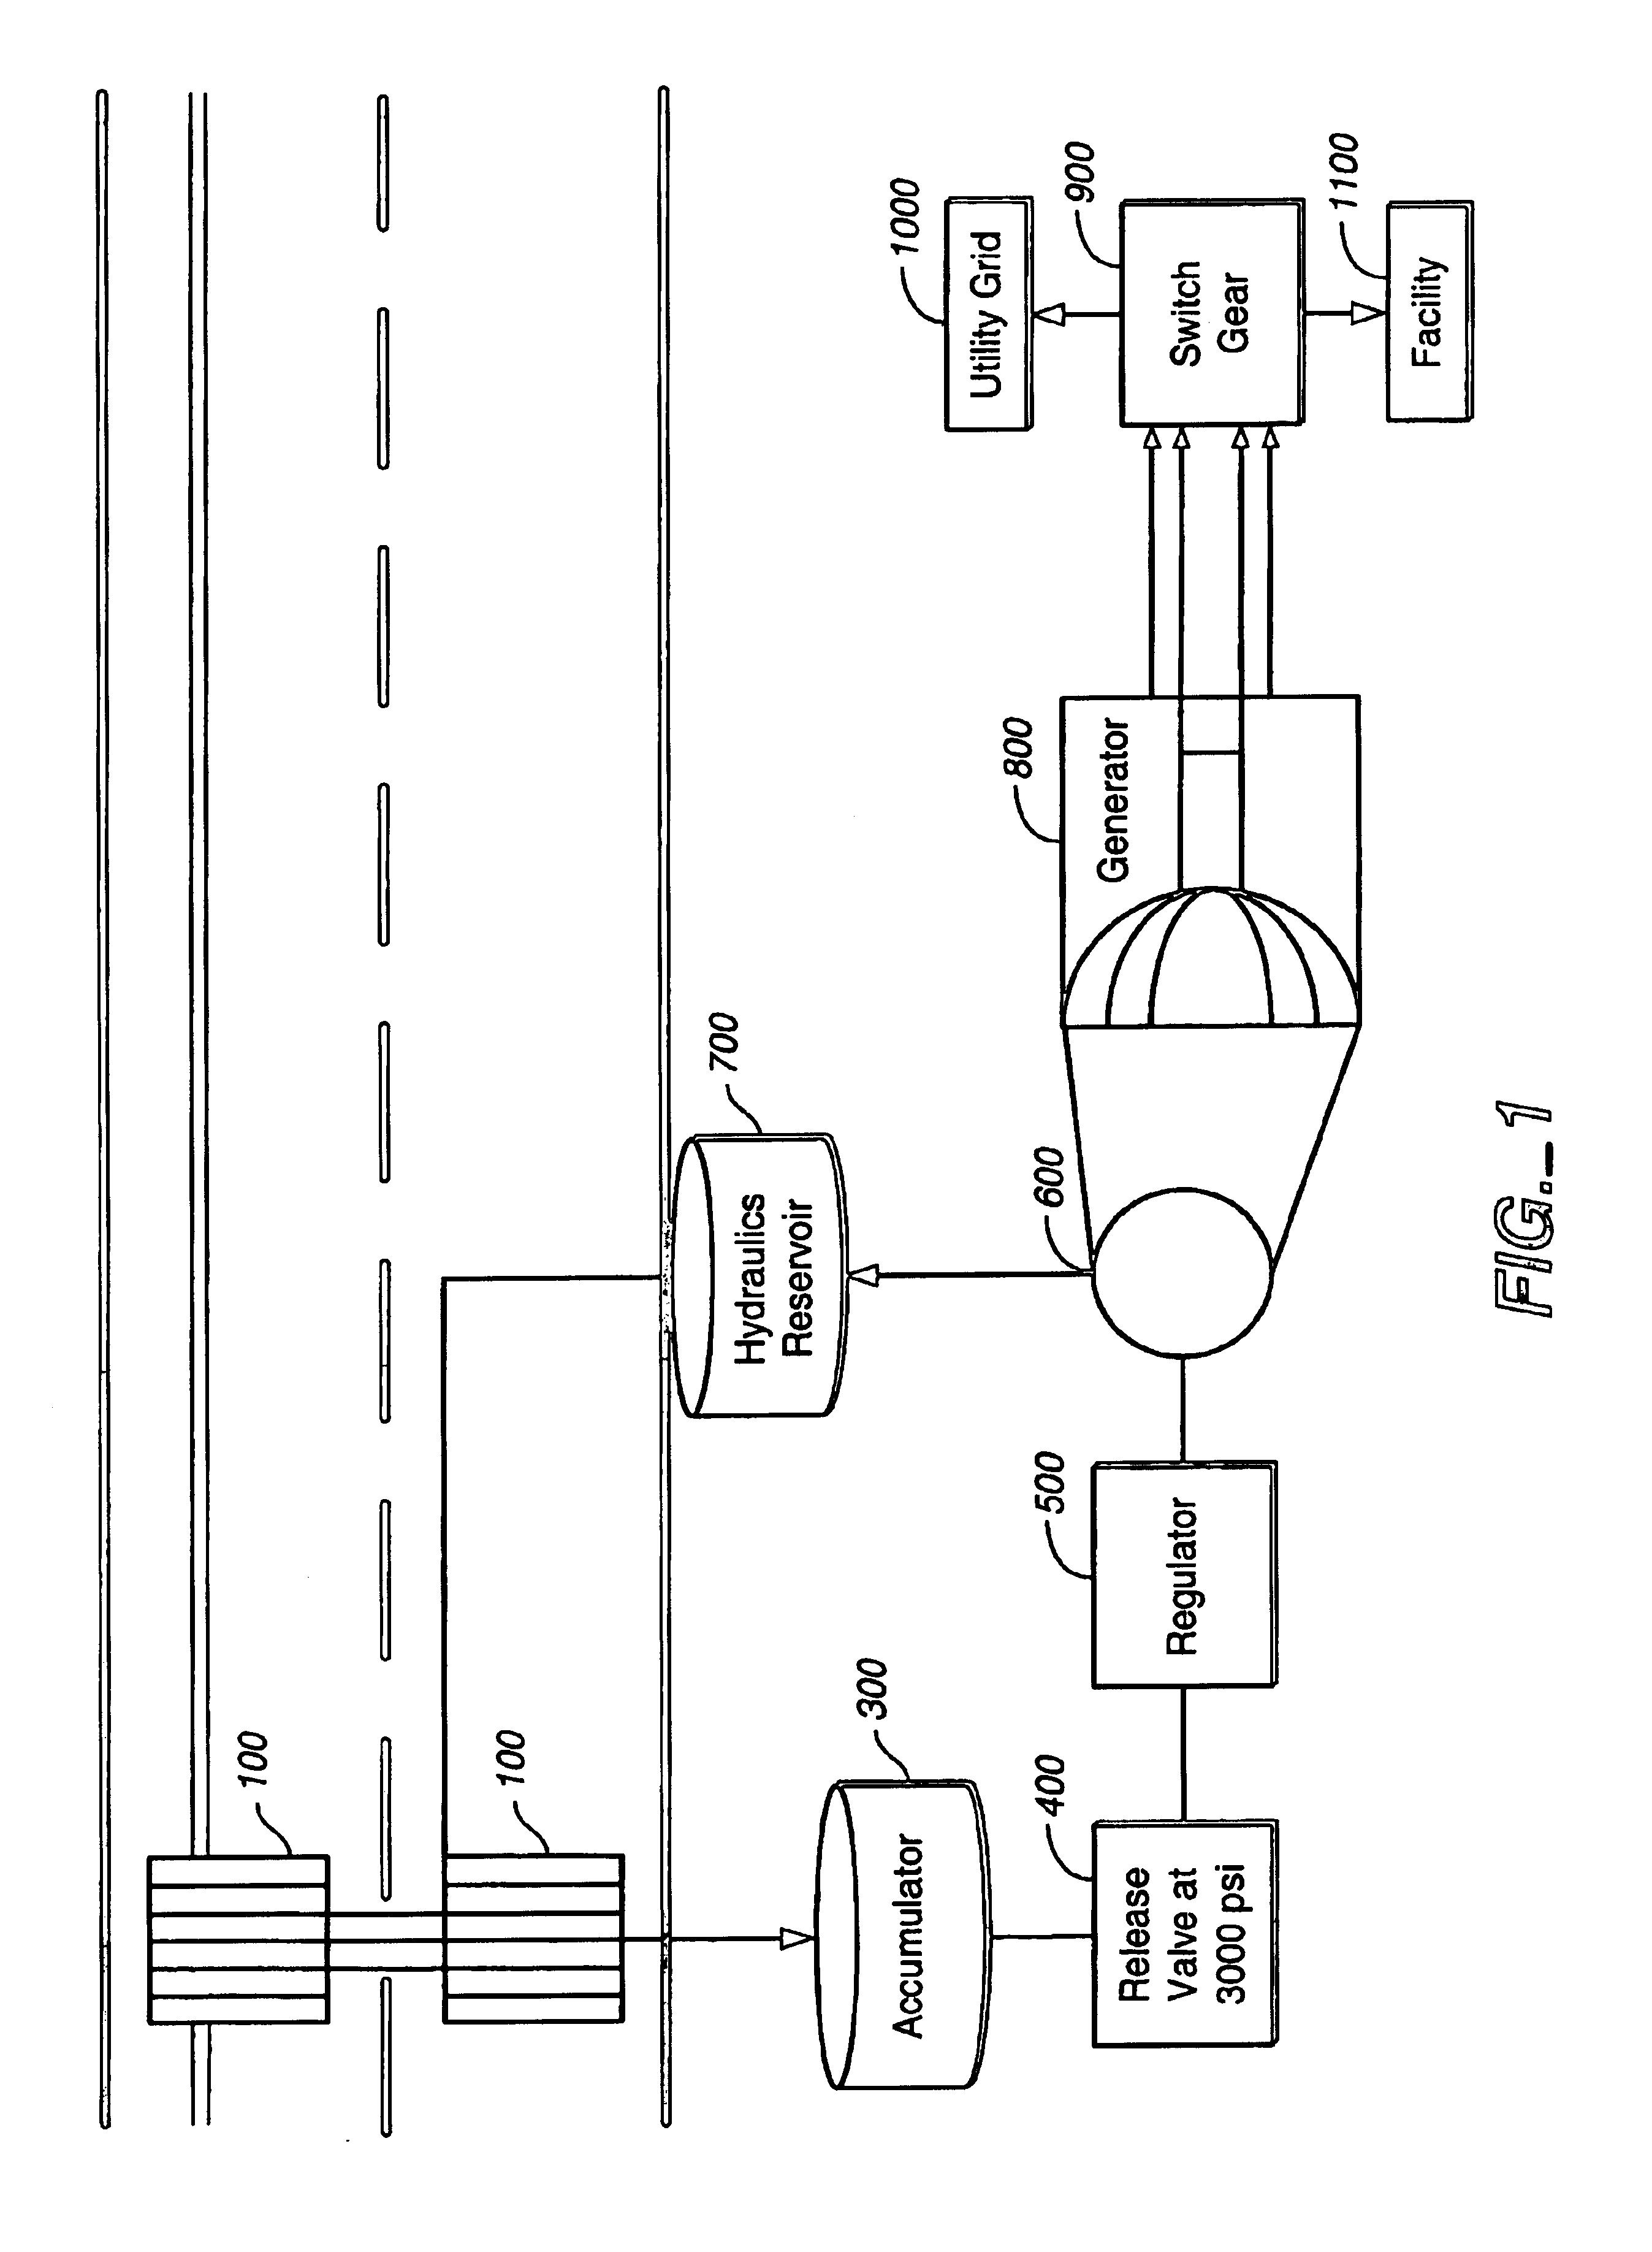 System and method for electrical power generation utilizing vehicle traffic on roadways